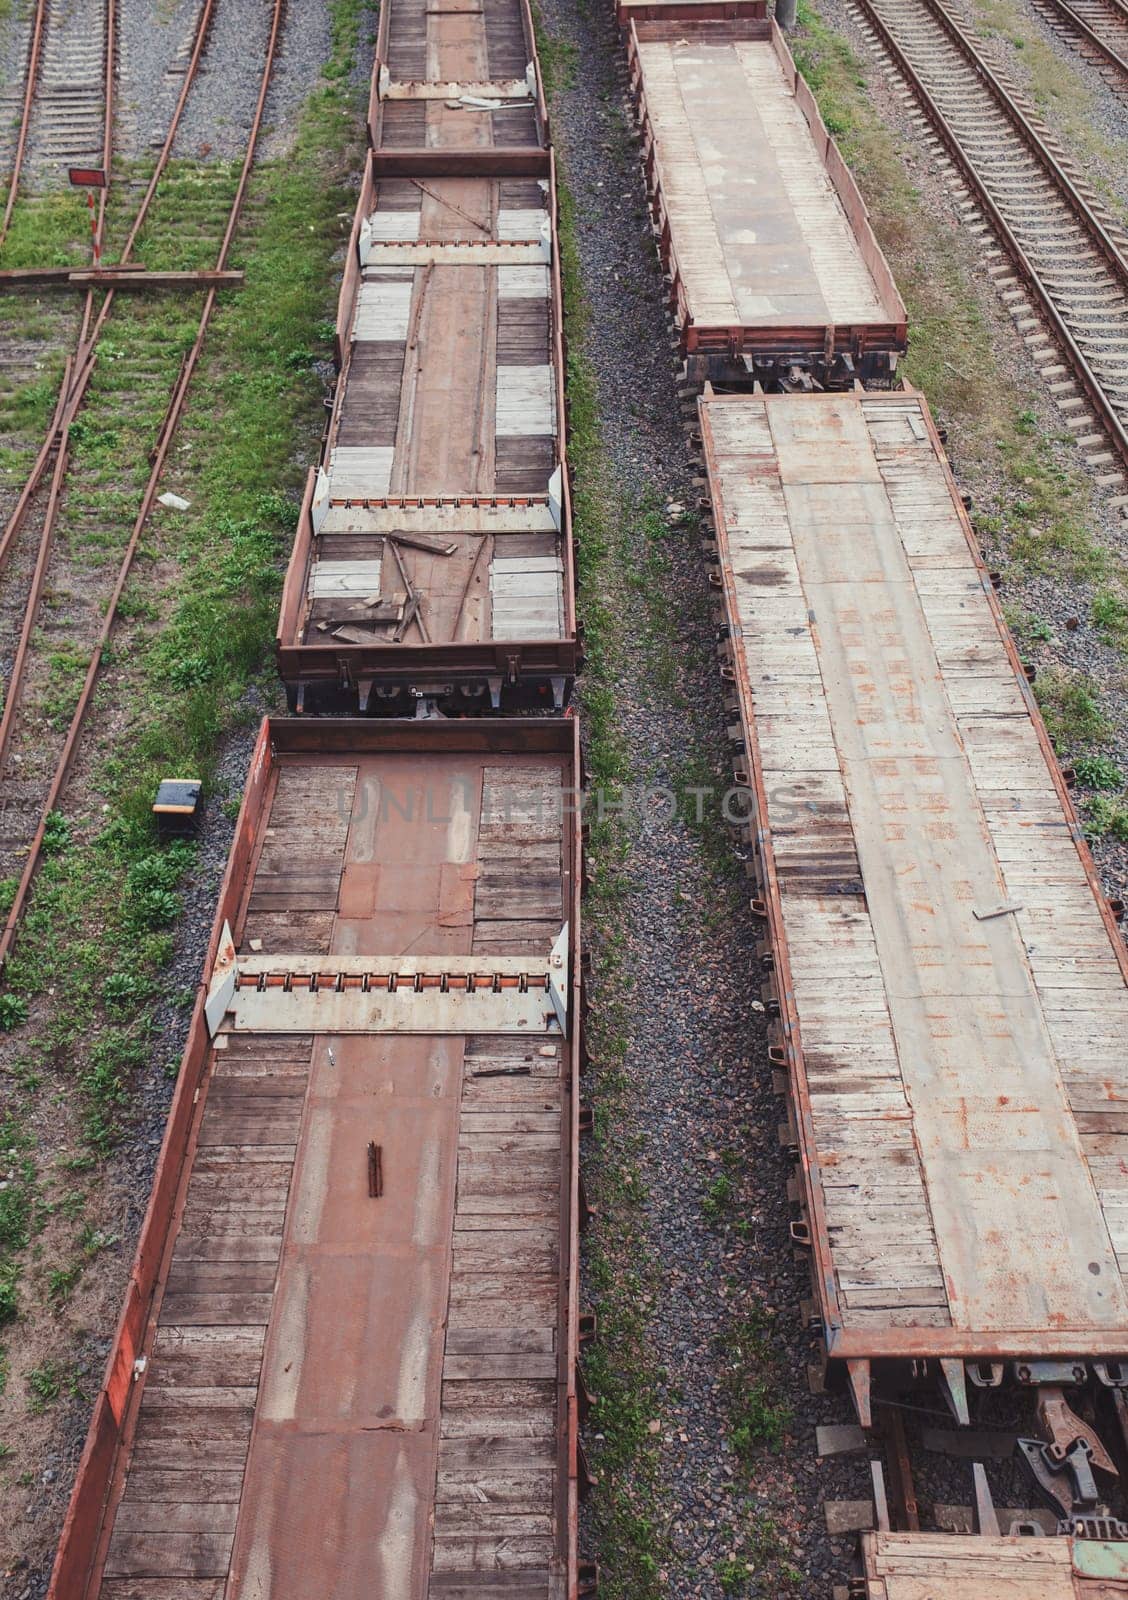 Freight trains on the railway station by Ladouski